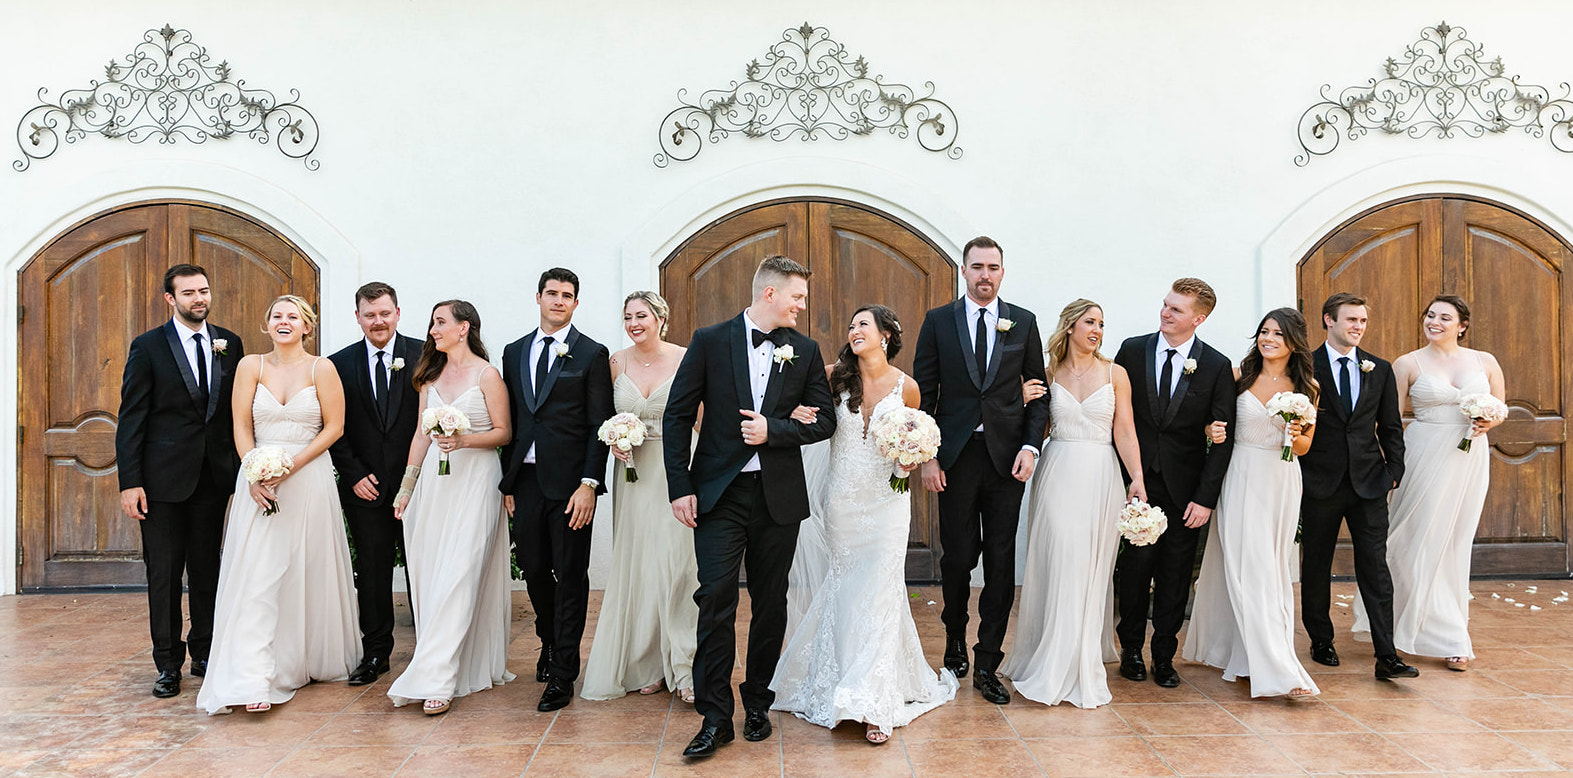 Bridal party laughing as they walk. Bride and groom with bridal party